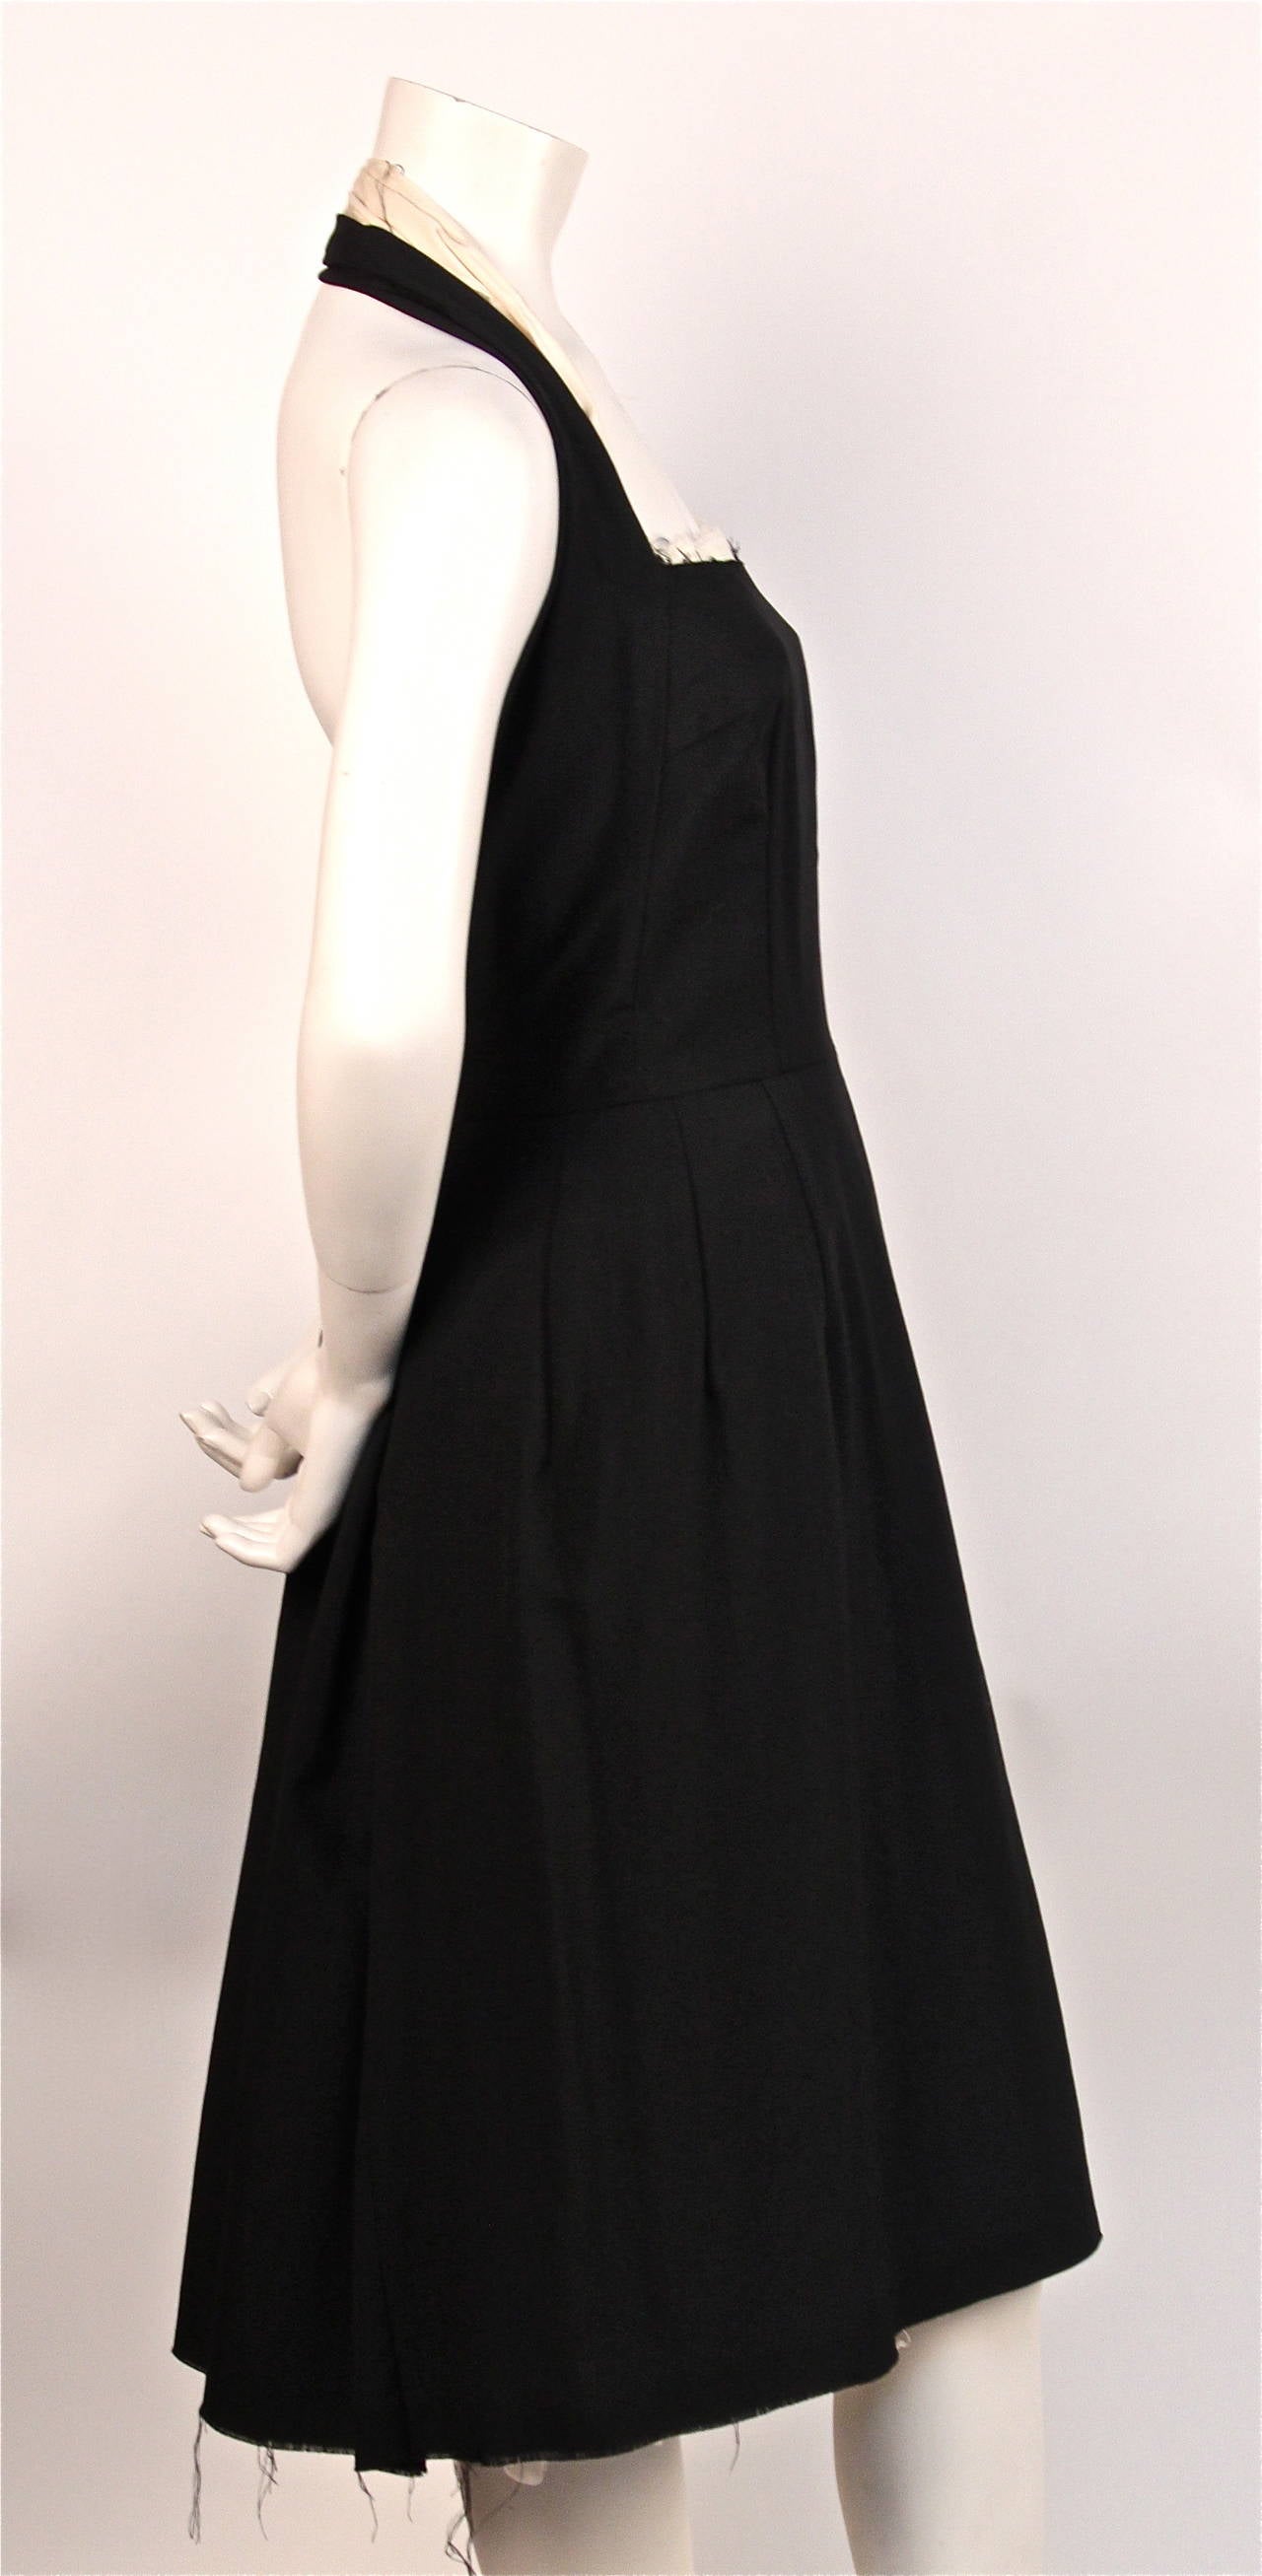 Very rare jet black cotton pinafore style halter dress with raw edges and unique muslin lining from Comme Des Garcons dating to 1997. Size 'S'. Approximate measurements: bust 32-34